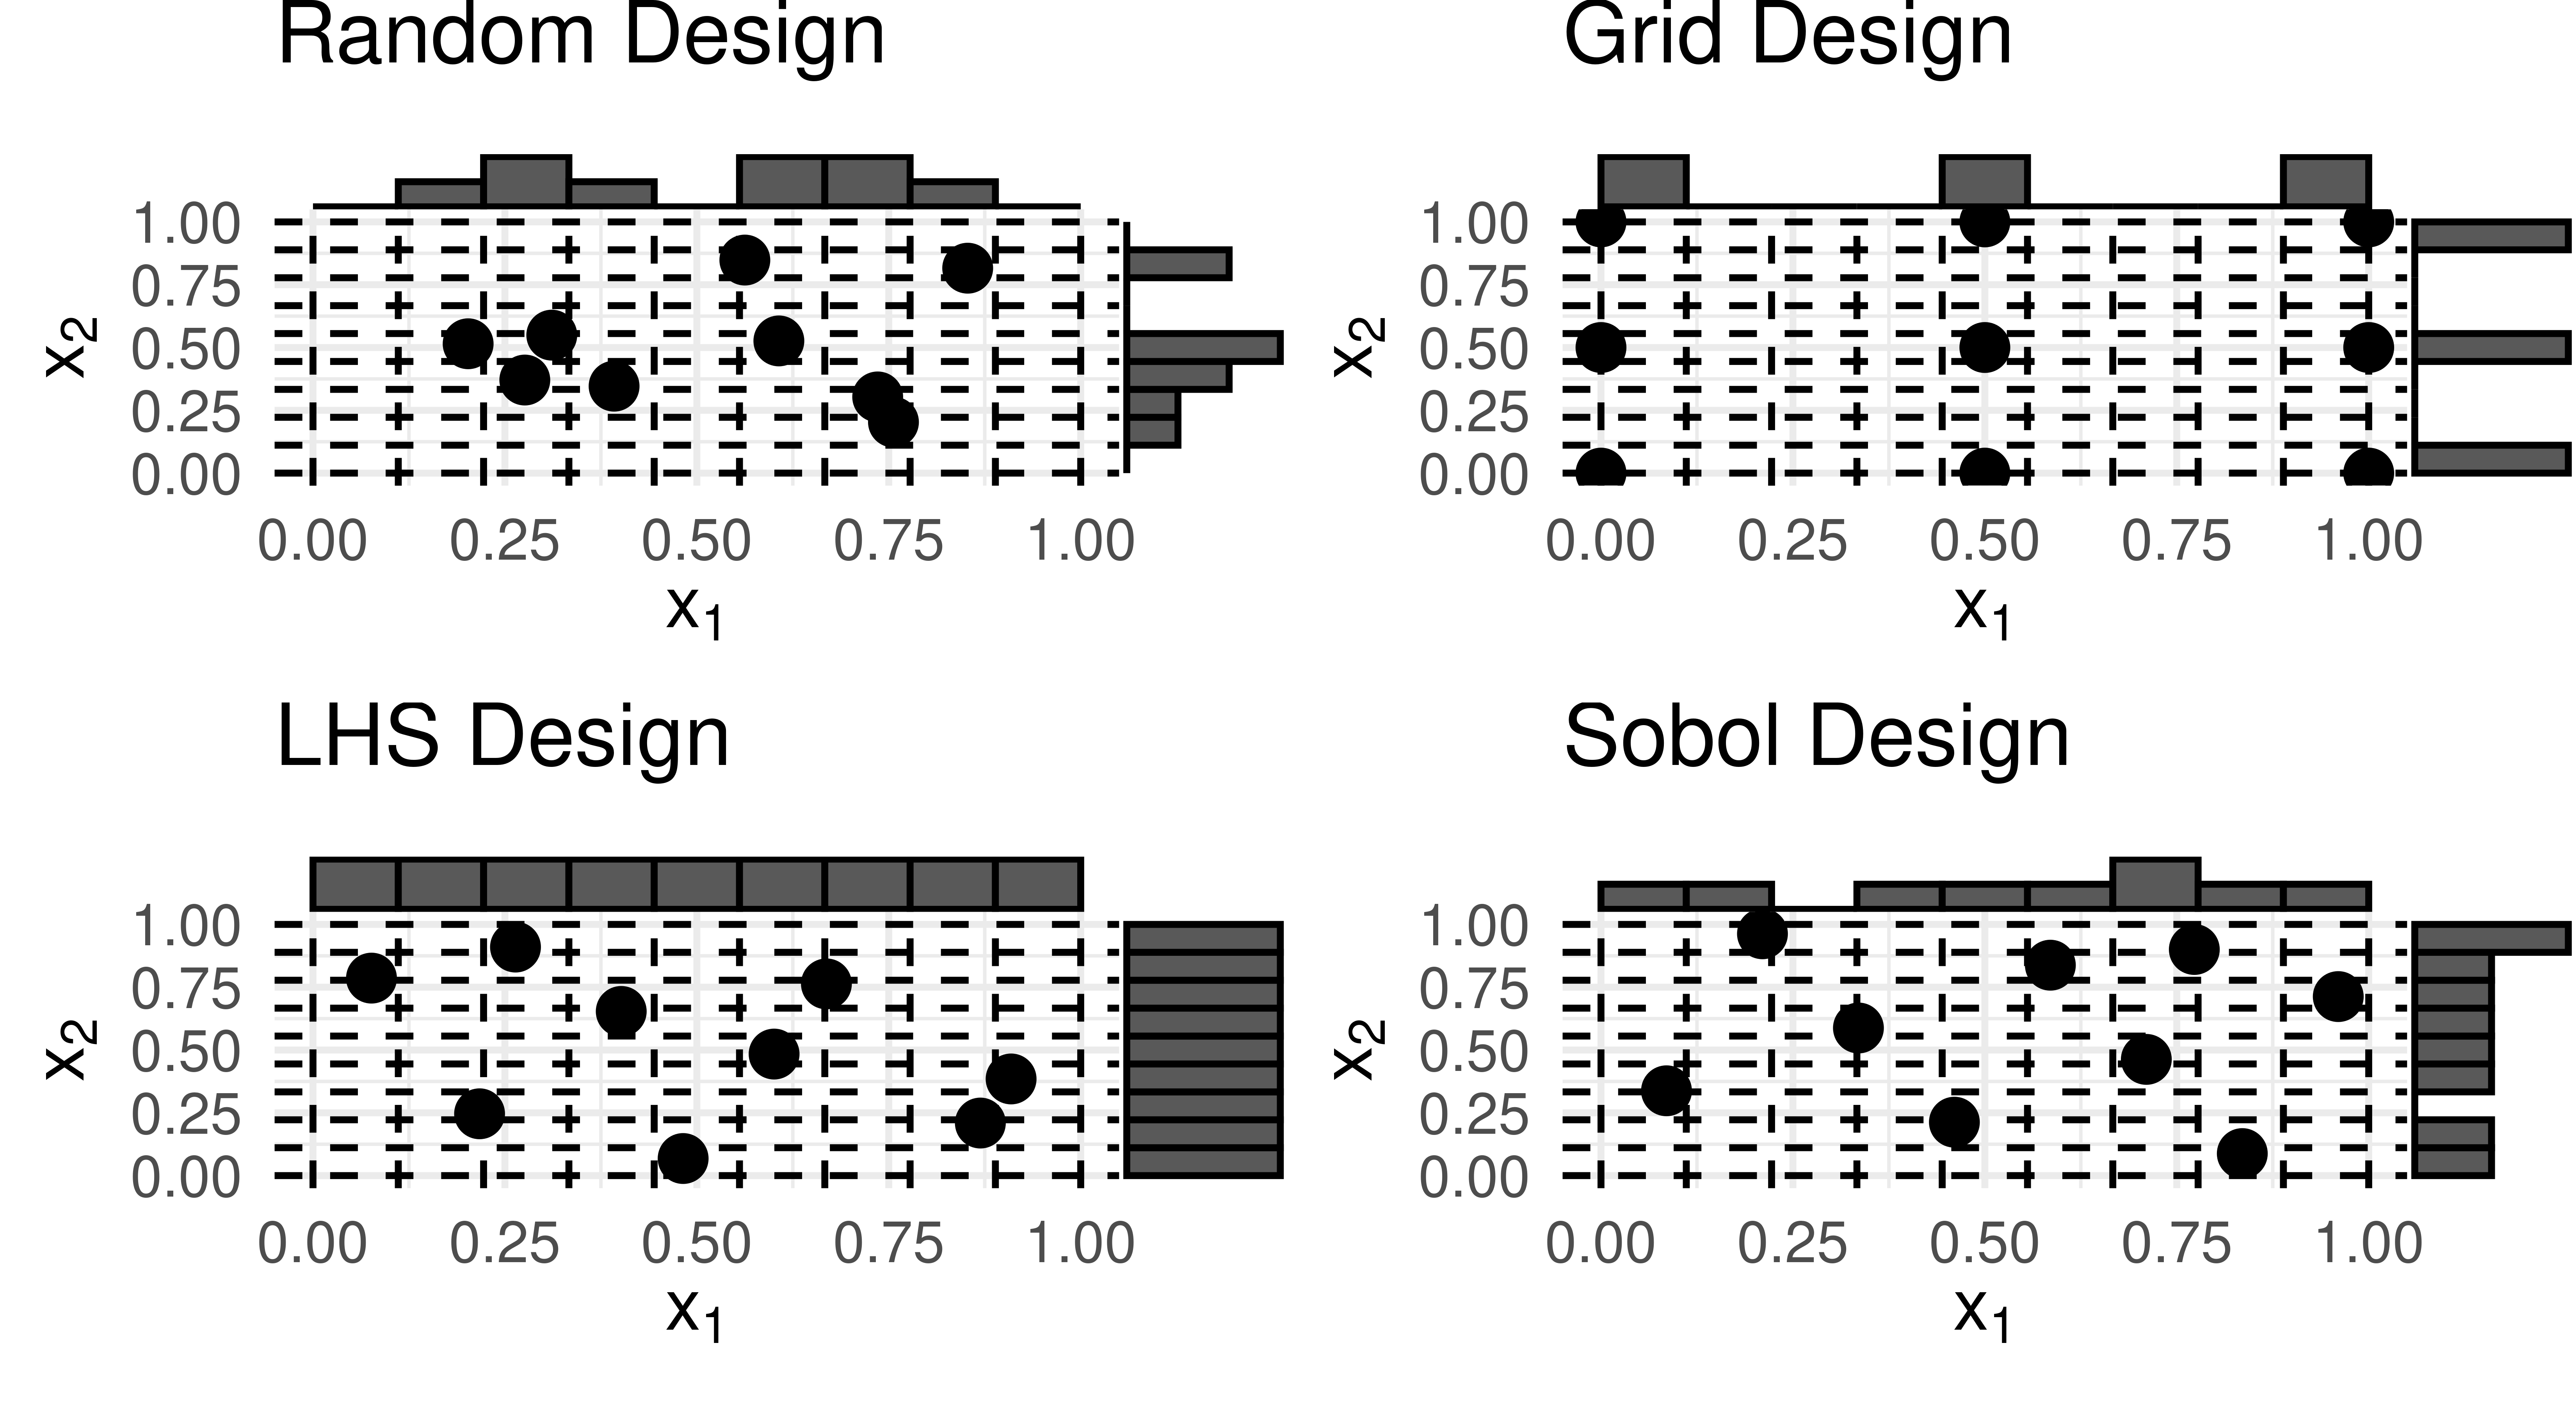 Plot shows four grids with x_1 on x-axis ranging from 0 to 1 and x_2 on y-axis ranging from 0 to 1. Each grid has bars above them and to the right representing marginal distributions. Top left: 'Random Design' nine points are scattered randomly across the grid with poor coverage. Marginal distributions are also random. Top right: 'Grid Design', points are uniformly scattered across the grid on lines x_1=0,x_1=0.5,x_1=1 and same for x_2. Marginal distributions show three long bars at each of the corresponding lines. Bottom left: 'LHS Design', points appear randomly scattered however marginal distributions are completely equal with equal-sized bars along each axis. Bottom right: 'Sobol Design', very similar to 'LHS Design' however one of the bars in the marginal distribution is slightly longer than the others.